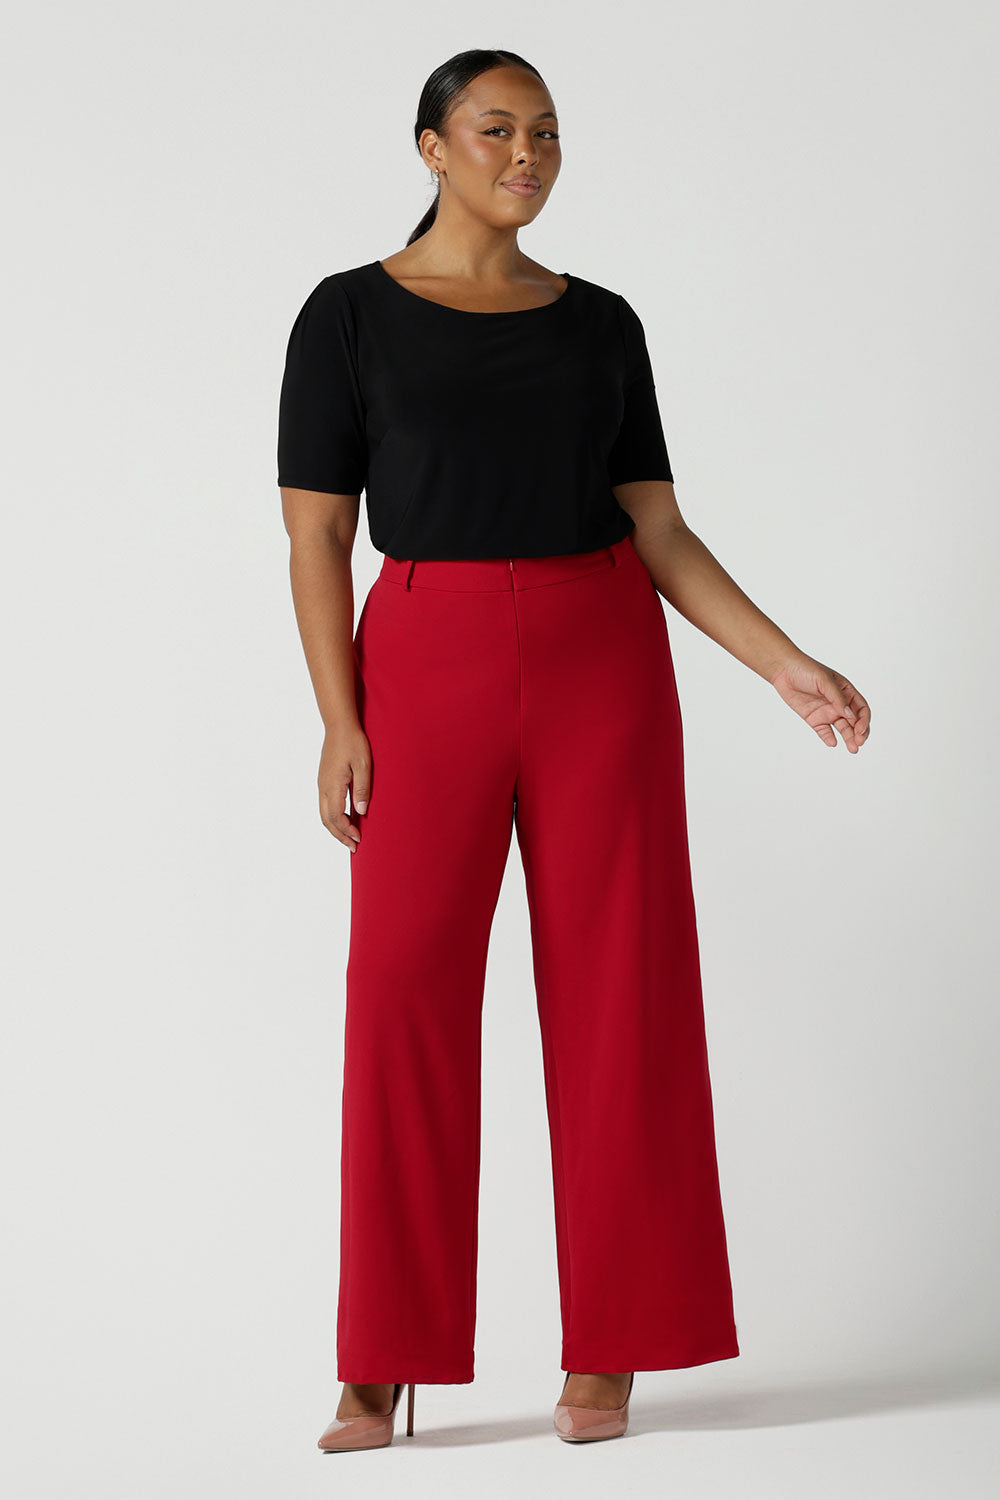 Size 16 woman wears the Drew pant in red, high waist and invisible fly front. Tailored belt loops and wide leg. Made in Australia for women. Stylish corporate wear for women. Made in Australia size 8 - 24. 